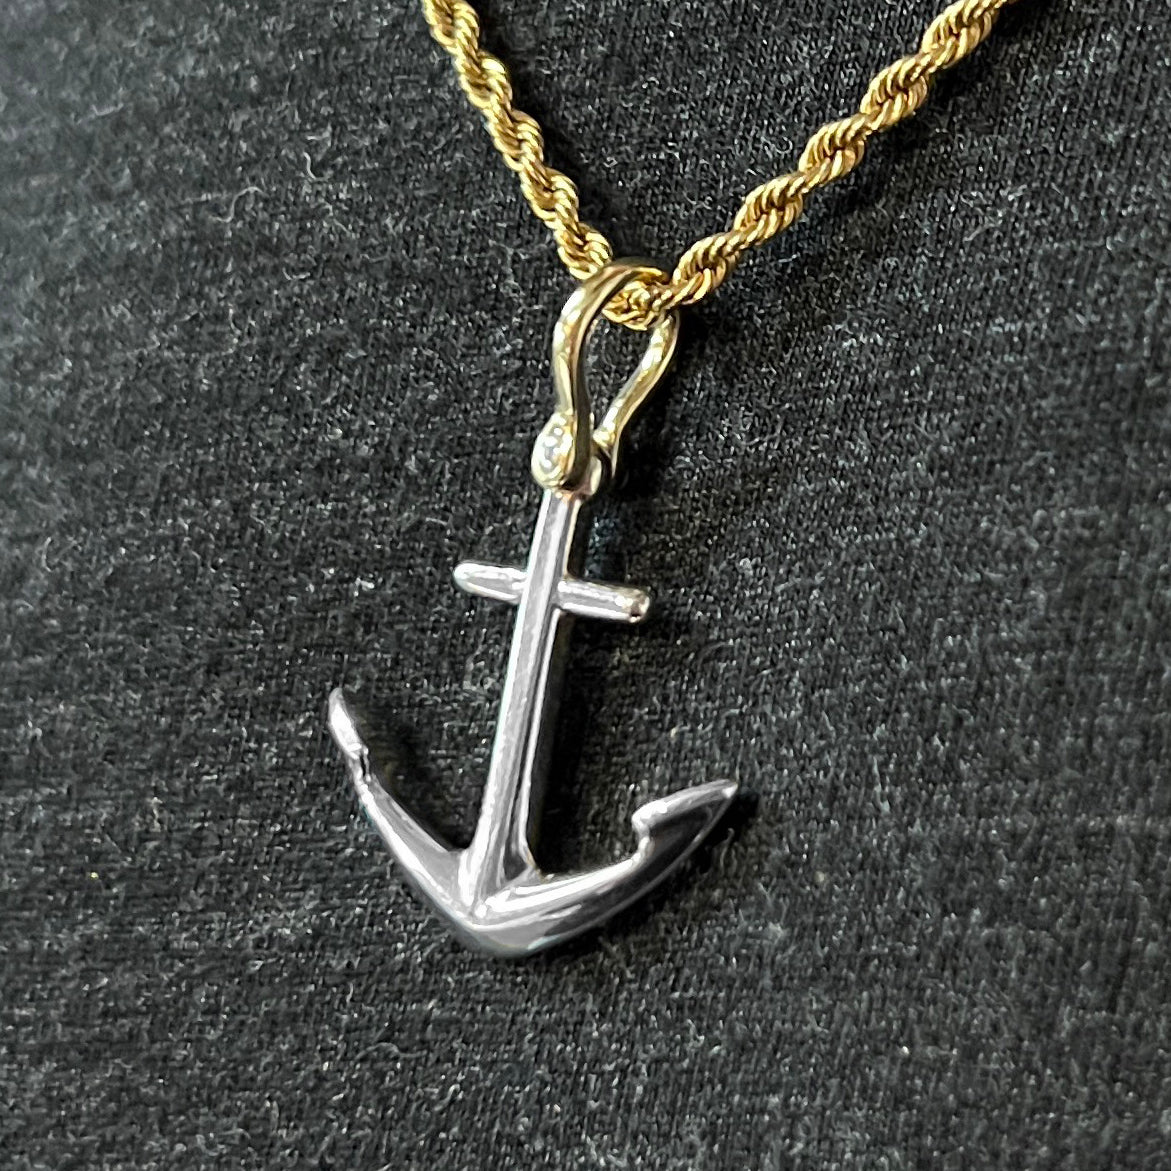 SEVEN SEAS 14K YELLOW GOLD ANCHOR PENDANT – Jewelry and The Sea